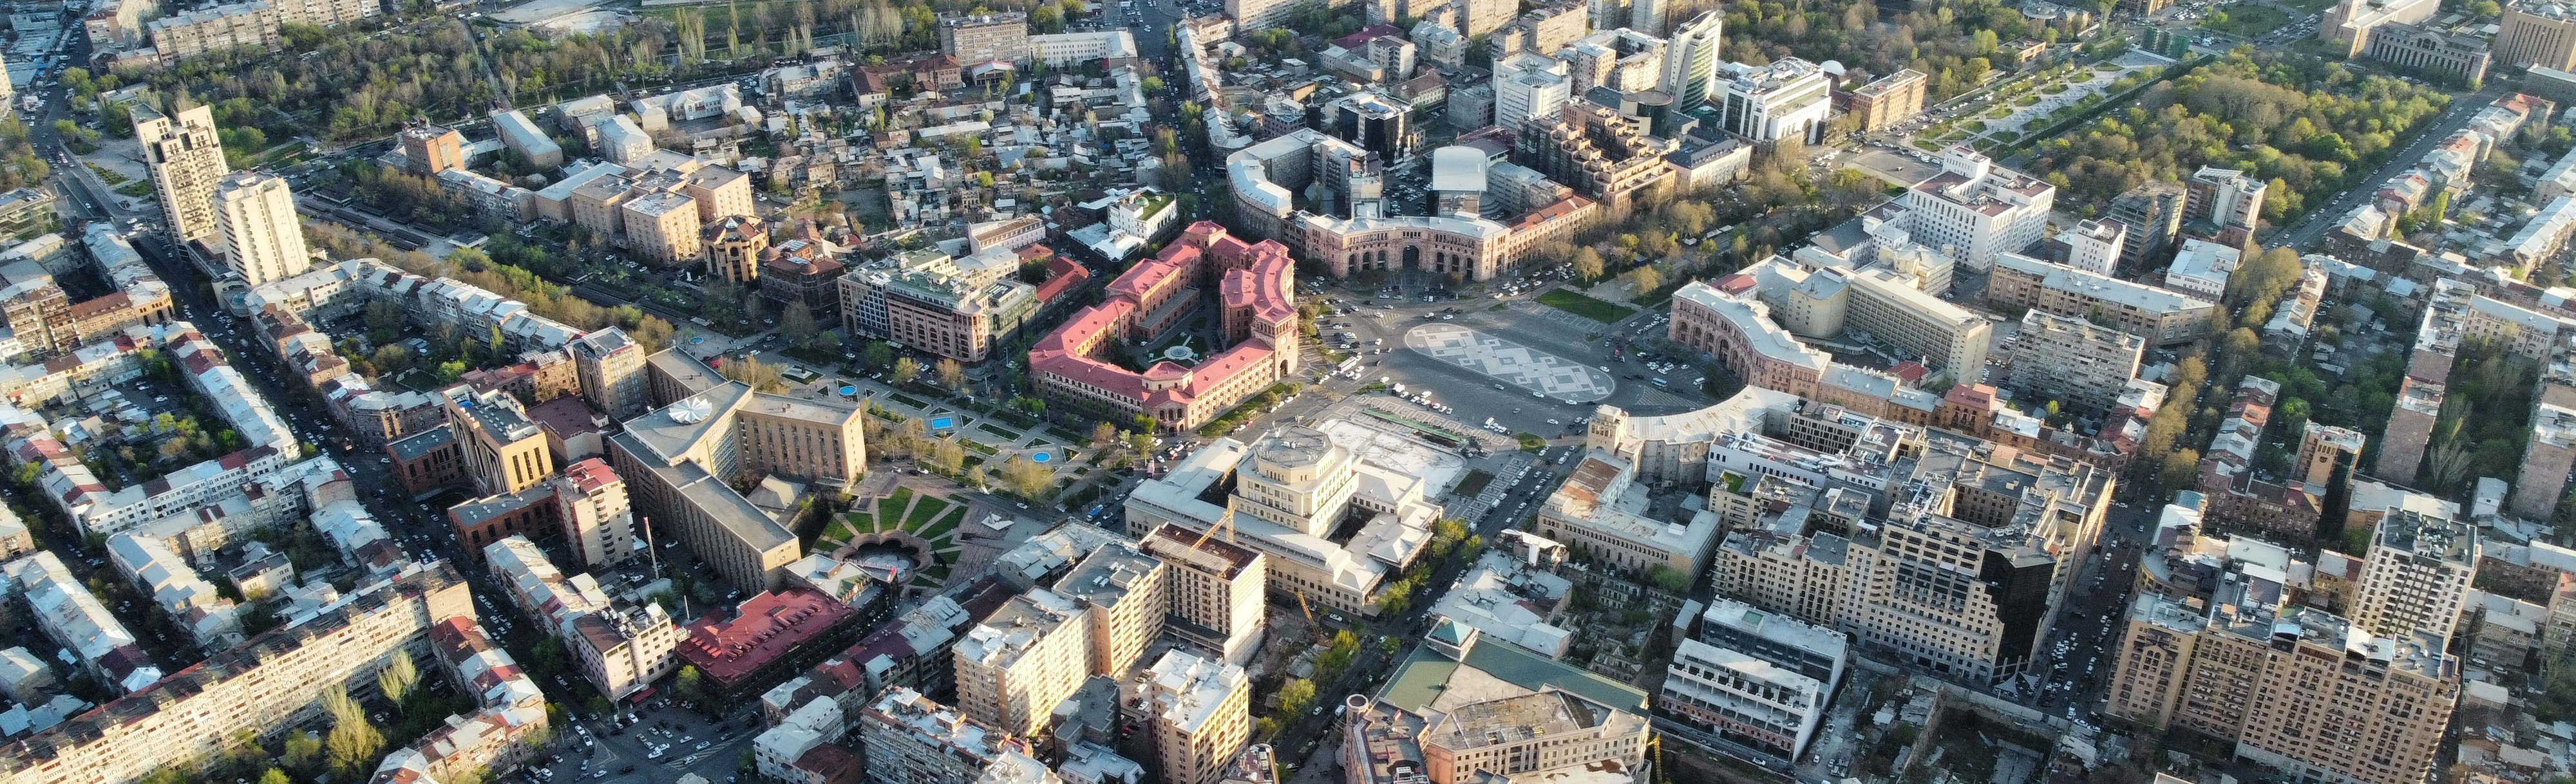 A bird's eye view of Yerevan, Armenia, showing a mix of modern high-rise buildings and historic, golden-colored buildings with red tiled roofs.